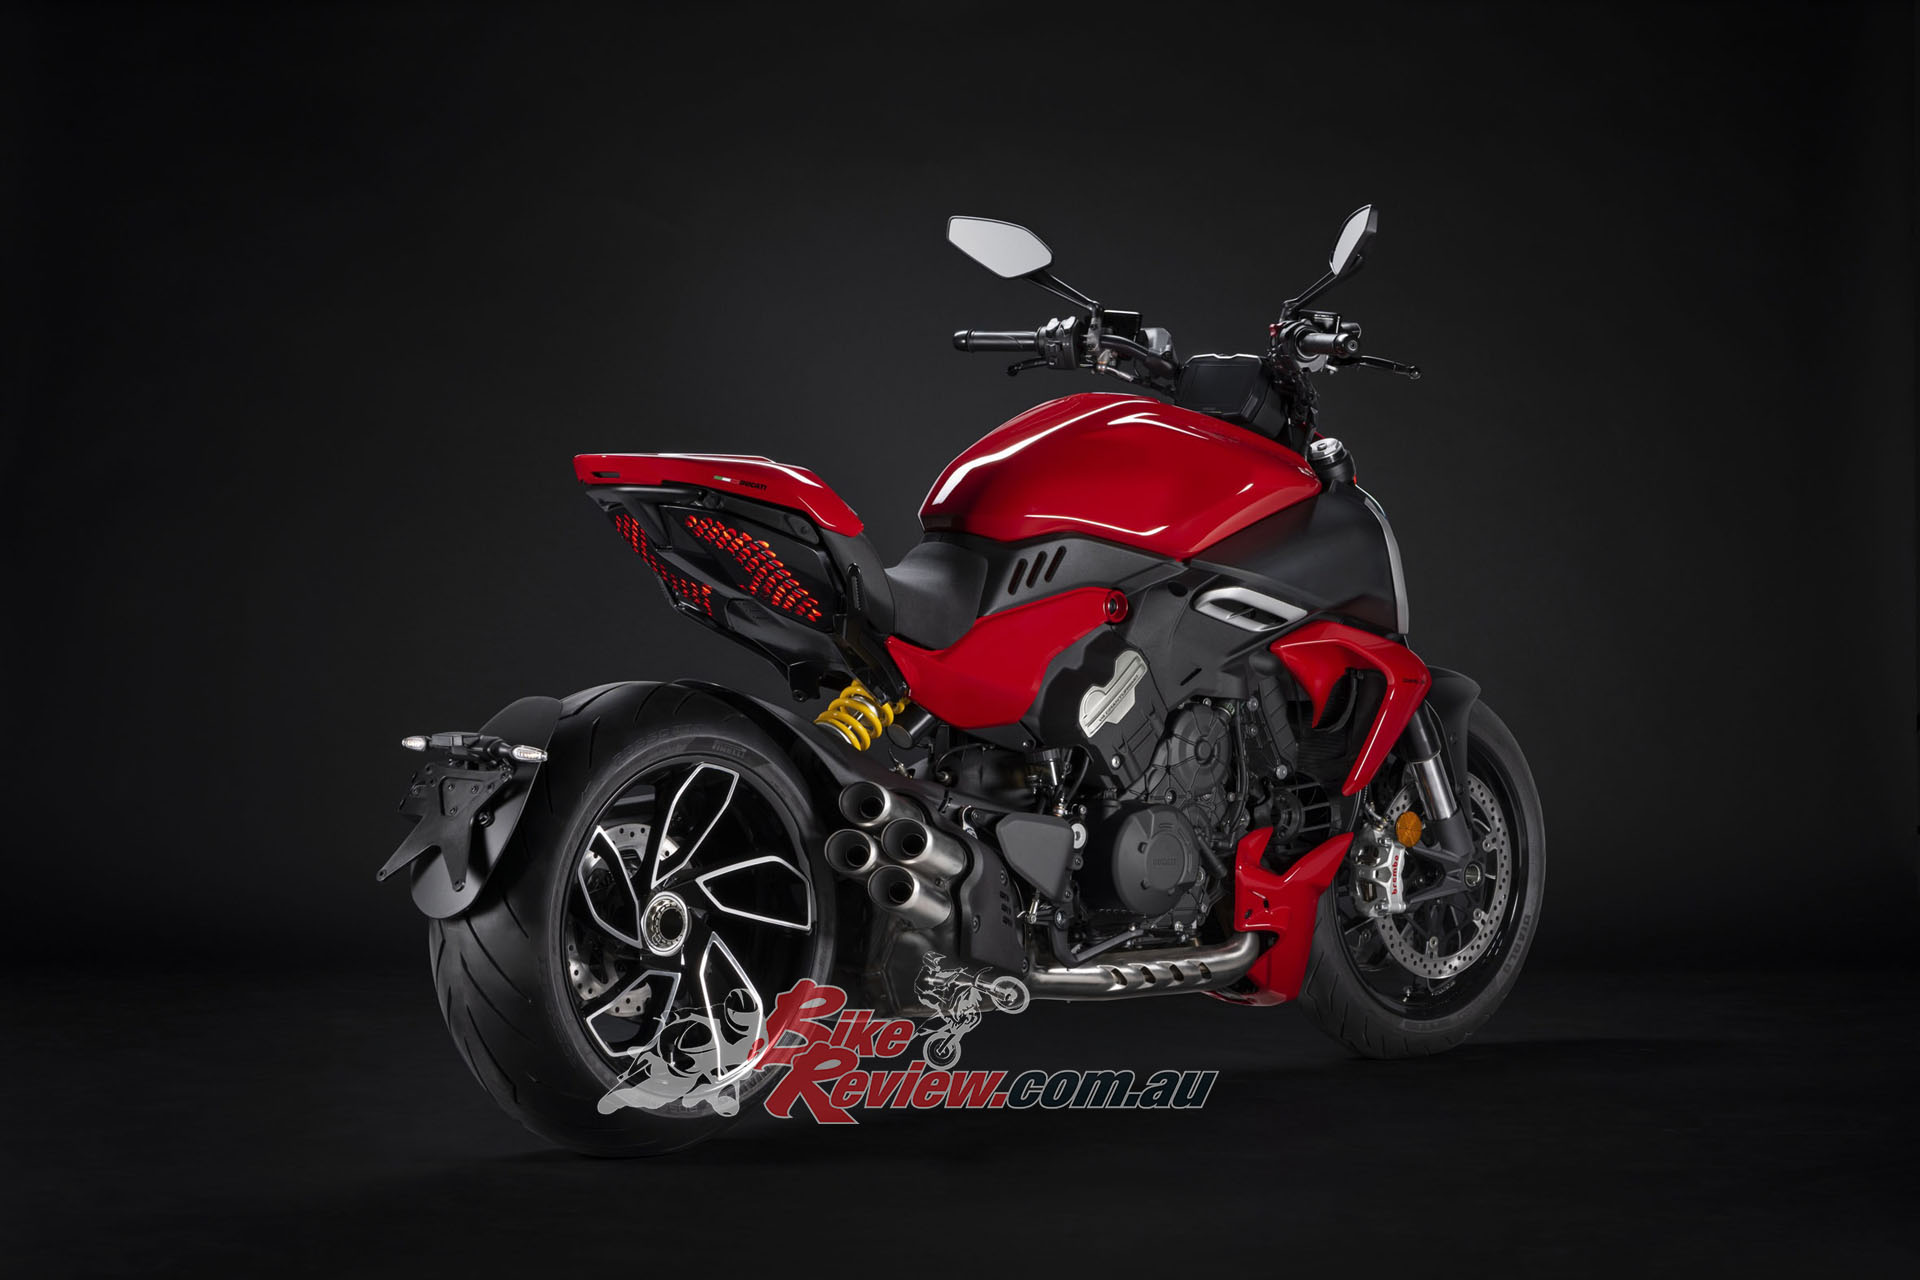 The Diavel V4 has a kerb weight without fuel of 223kg, saving more than 13kg (-5 on the engine, -8 on the bike) compared to the Diavel 1260 S.